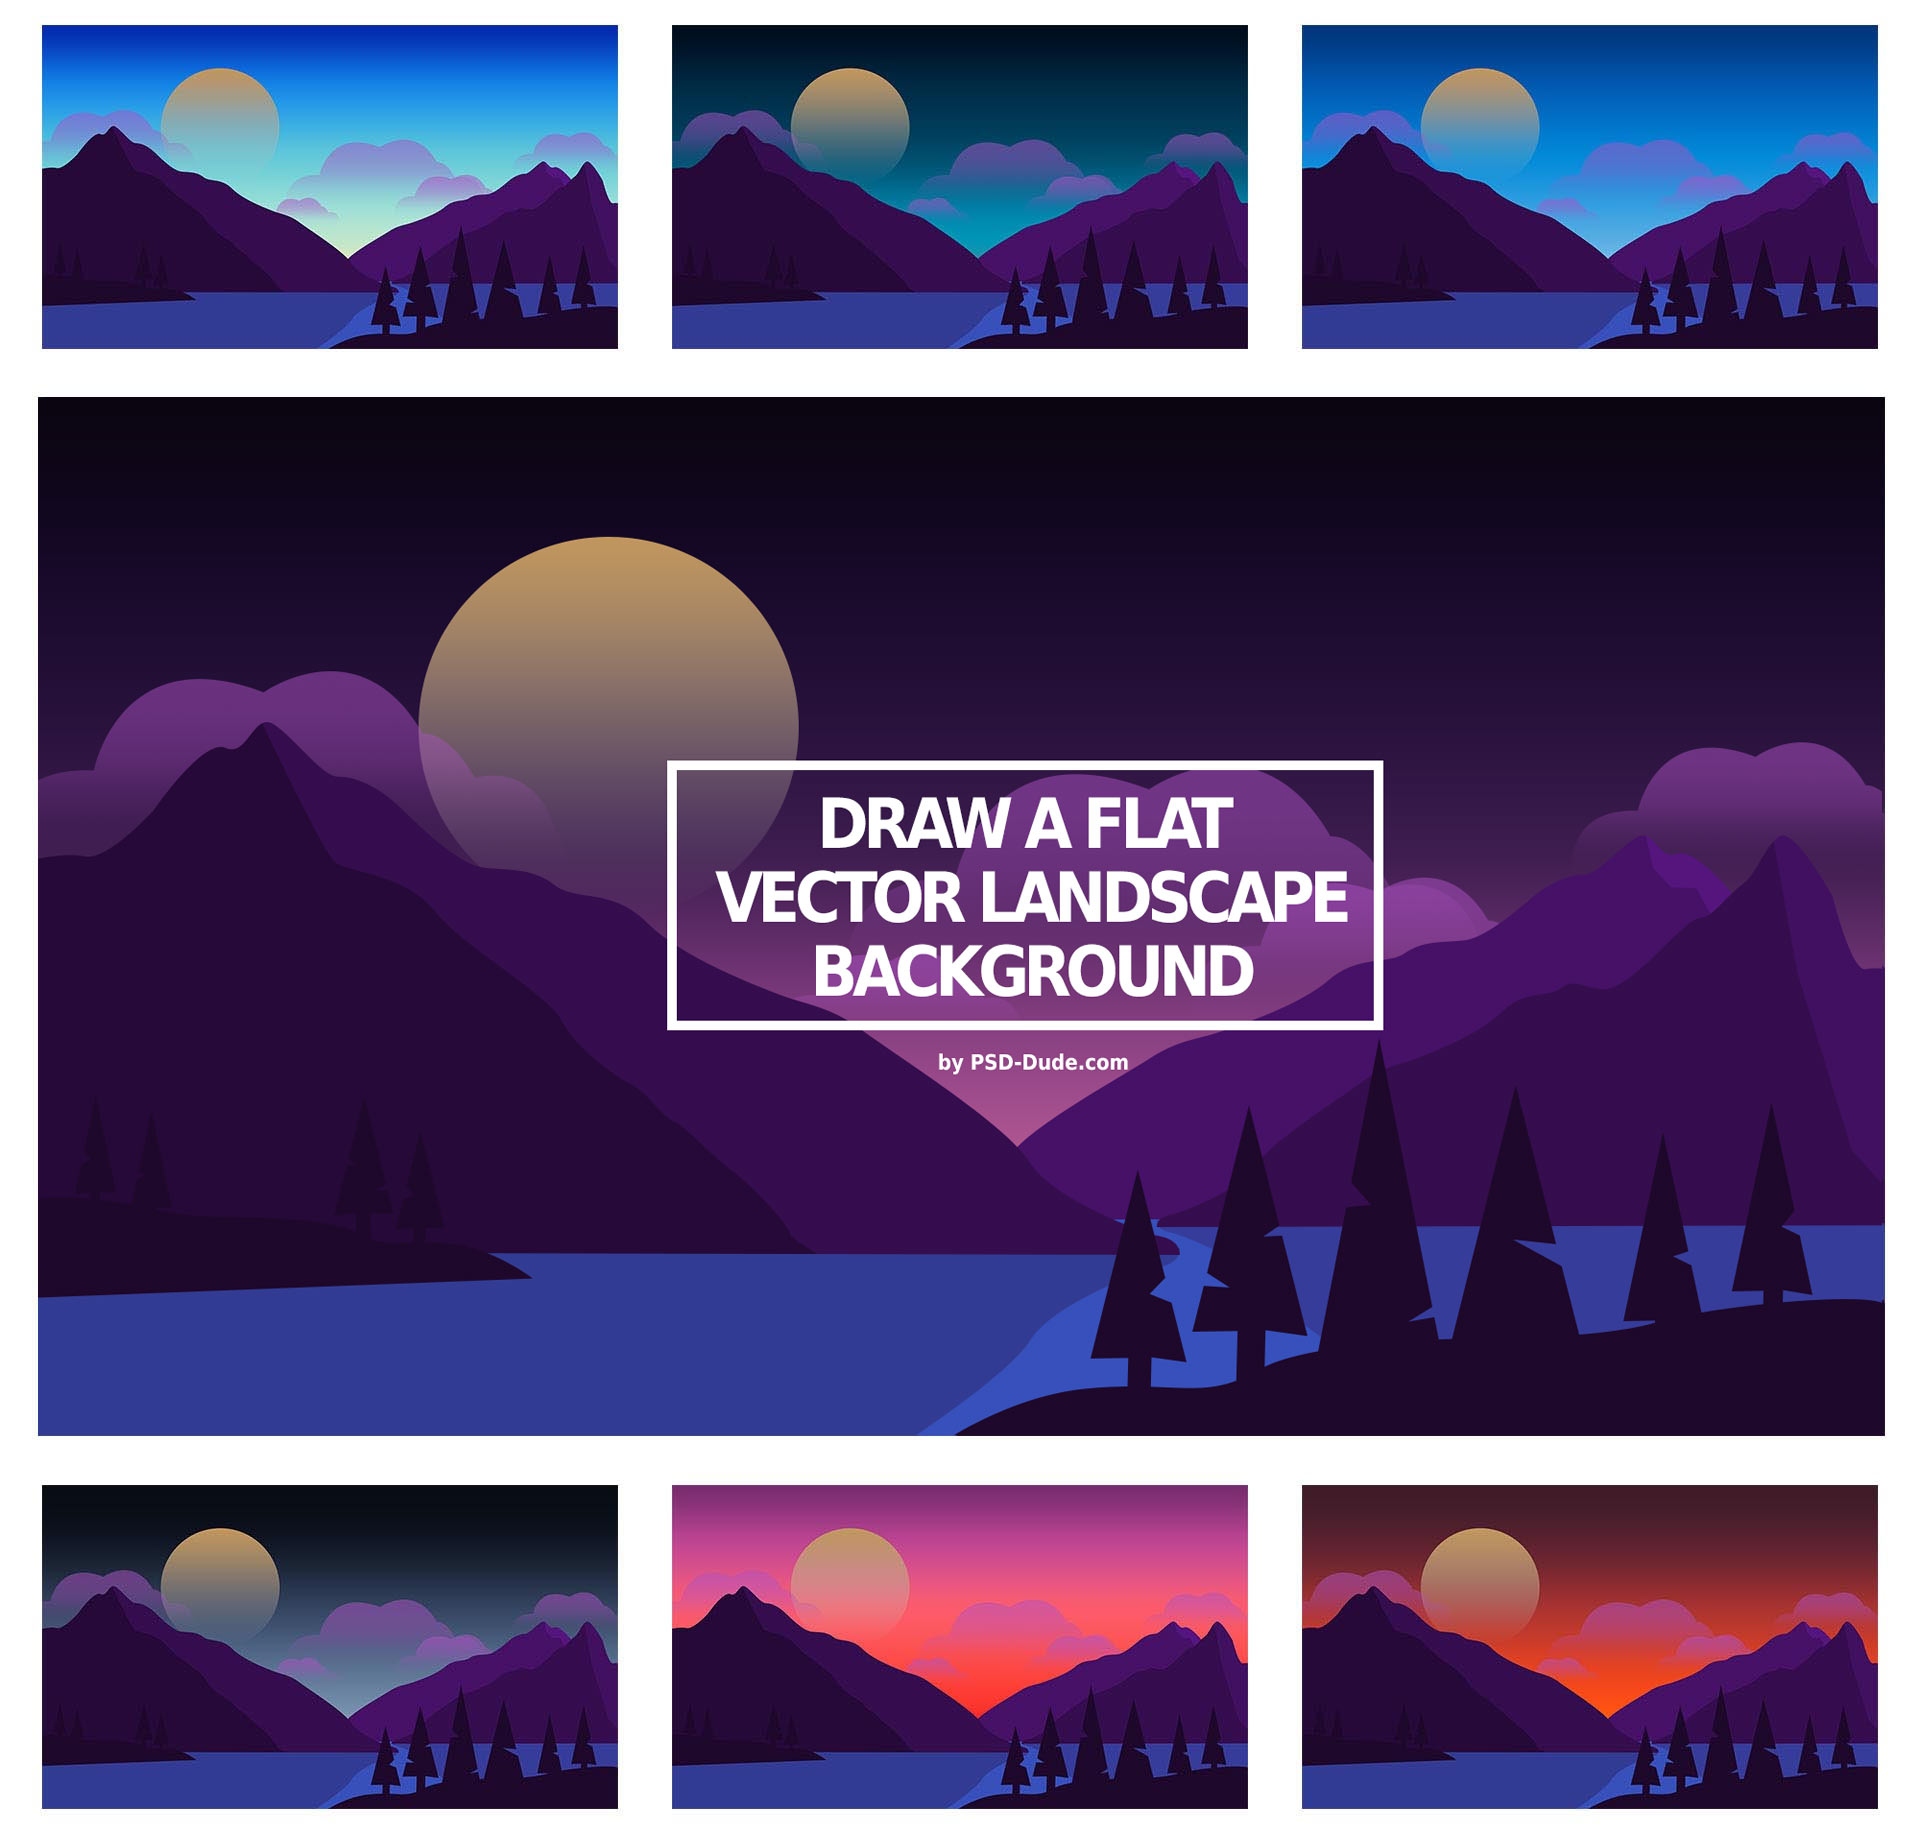 How To Draw A Flat Vector Landscape In Photoshop